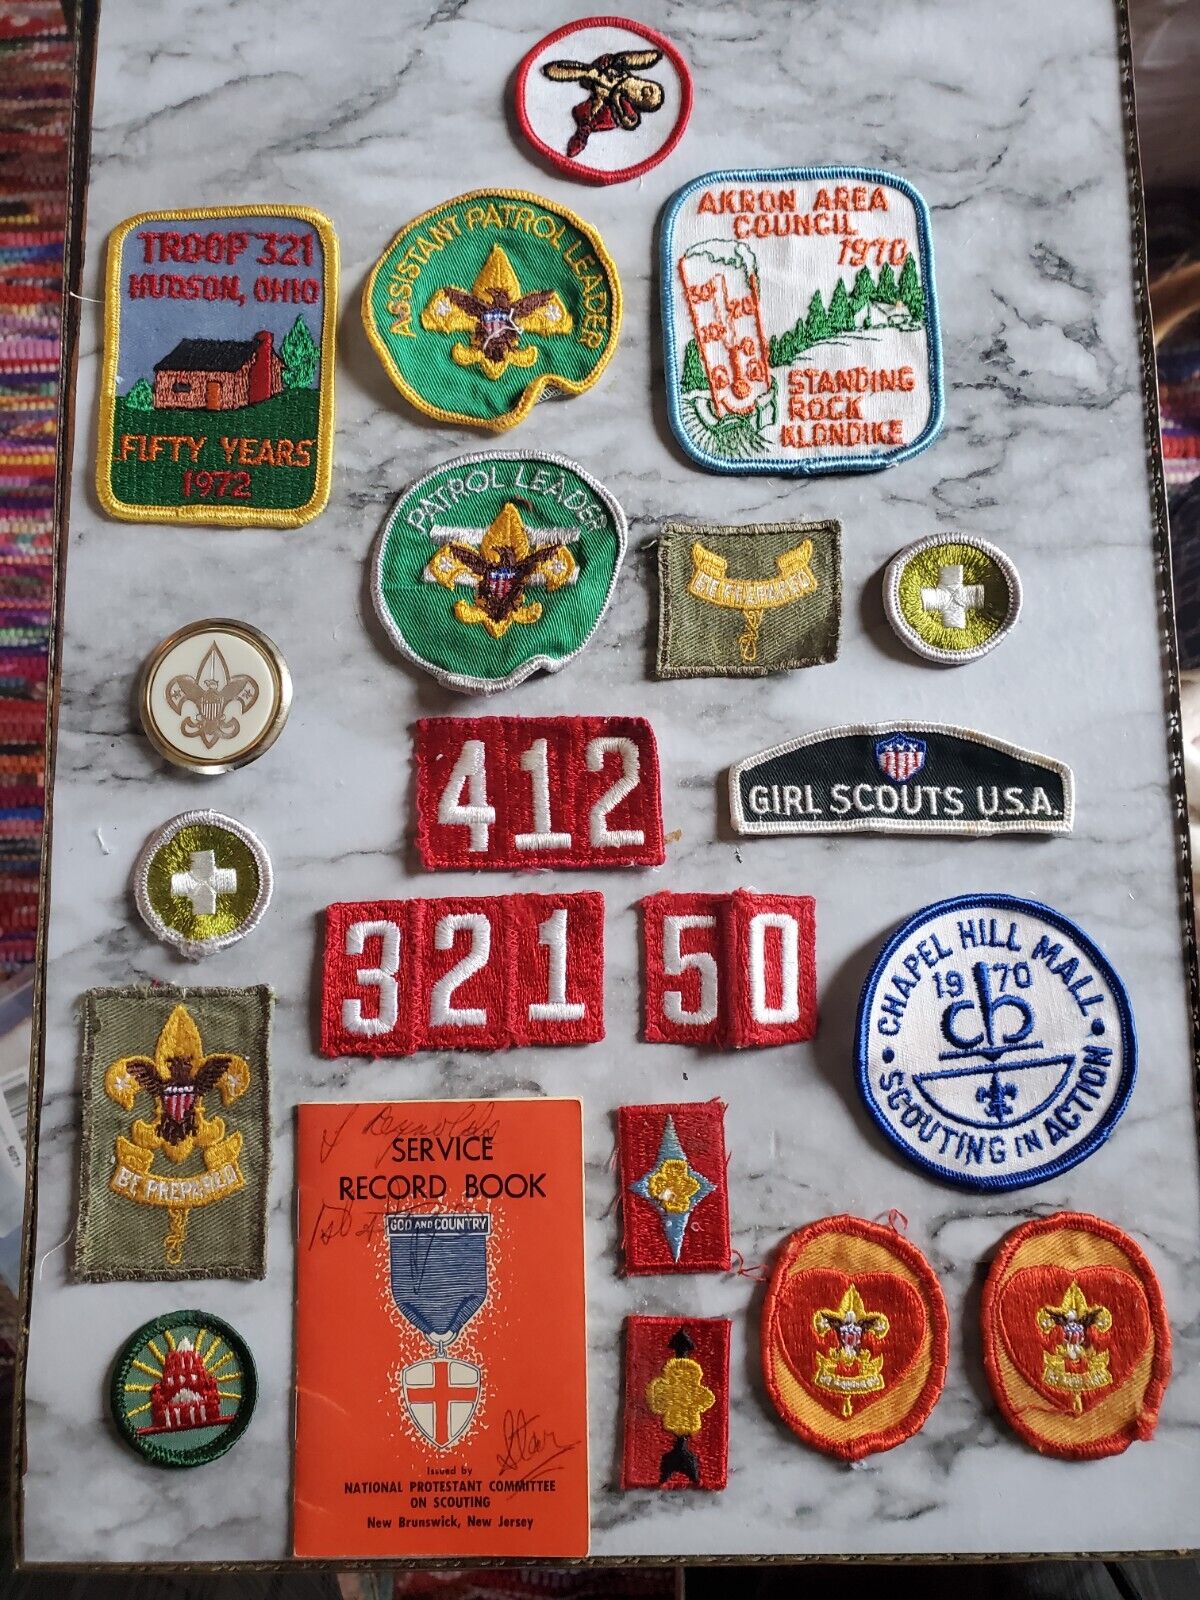 Vintage Boy Scout Girl Scout Patches & Memorabilia- 21 Items Scouting In Action 